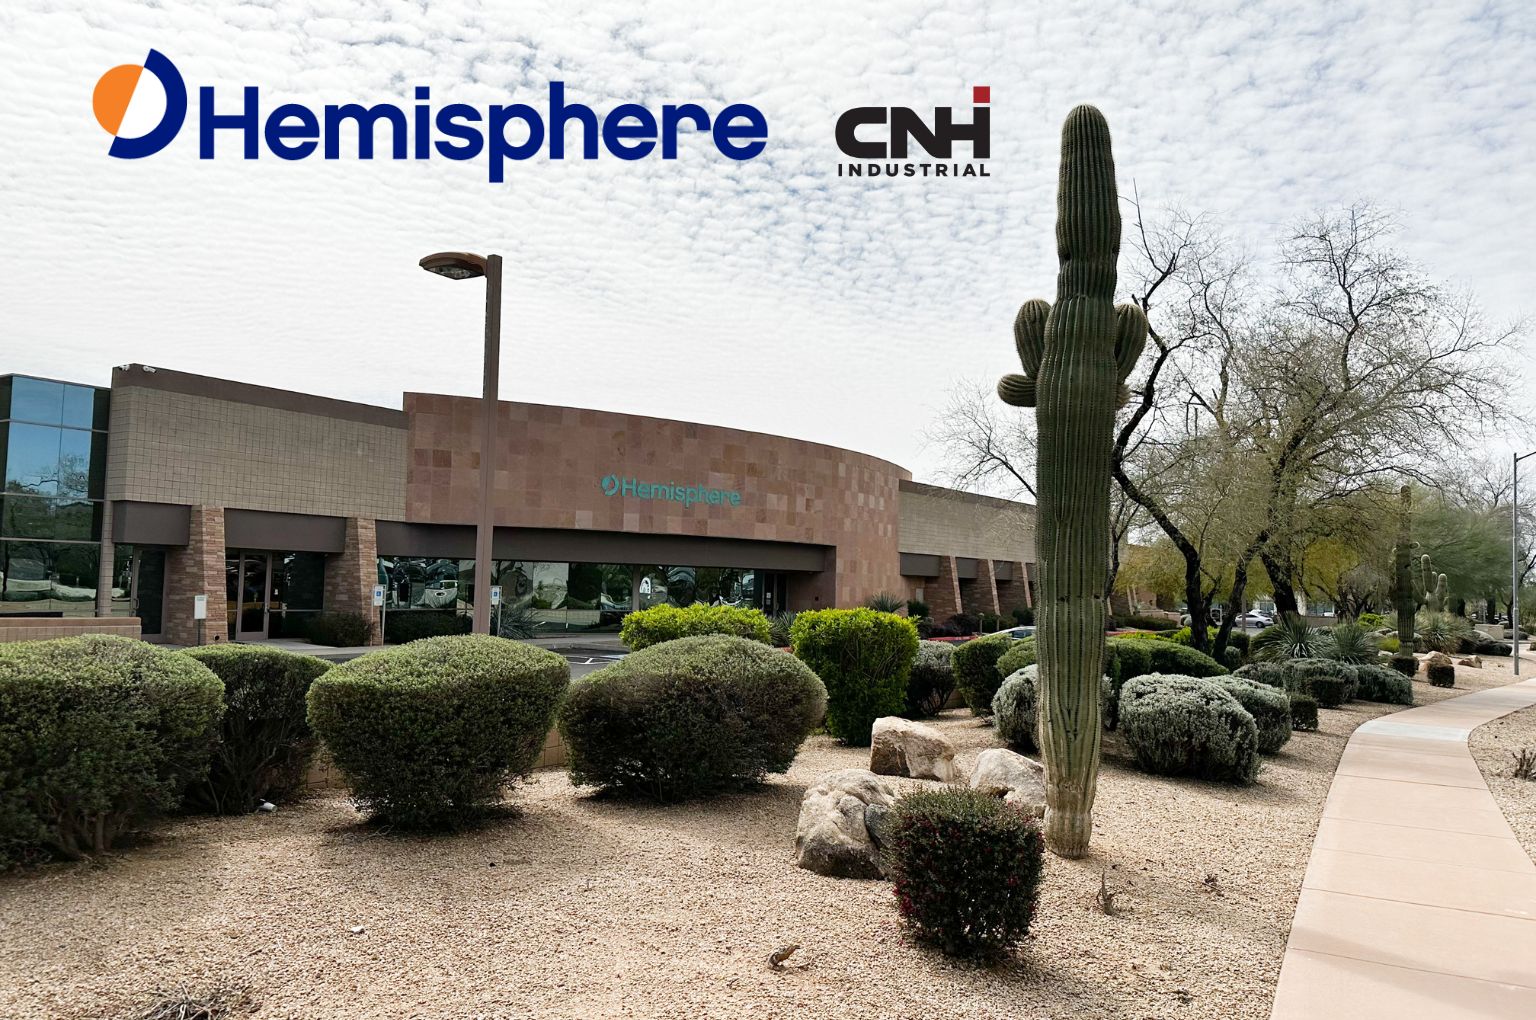 CNH Industrial to acquire Hemisphere